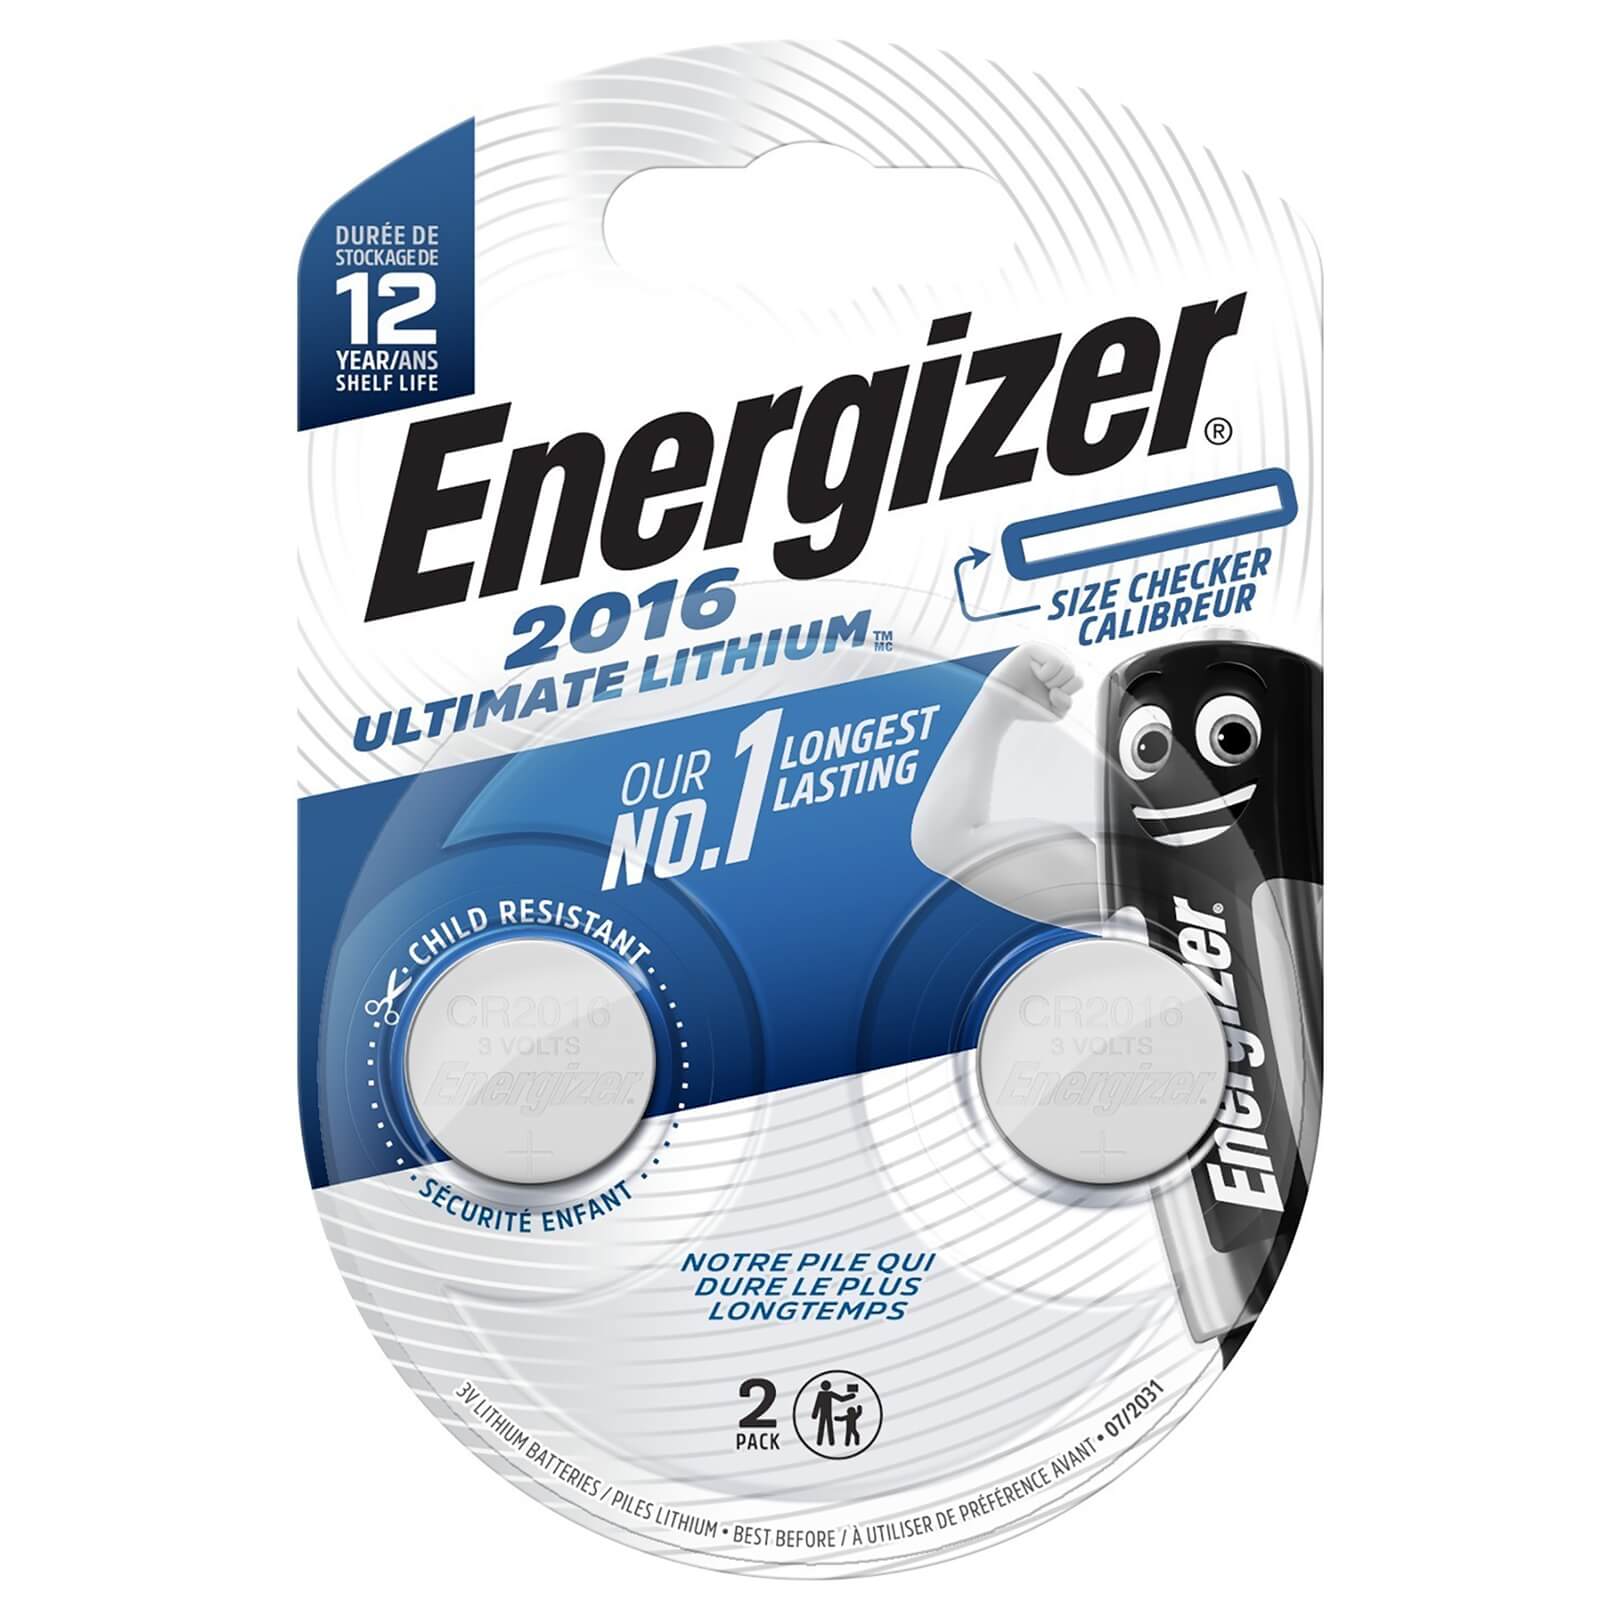 Energizer CR2016 Ultimate Lithium Coin Battery - 2 Pack